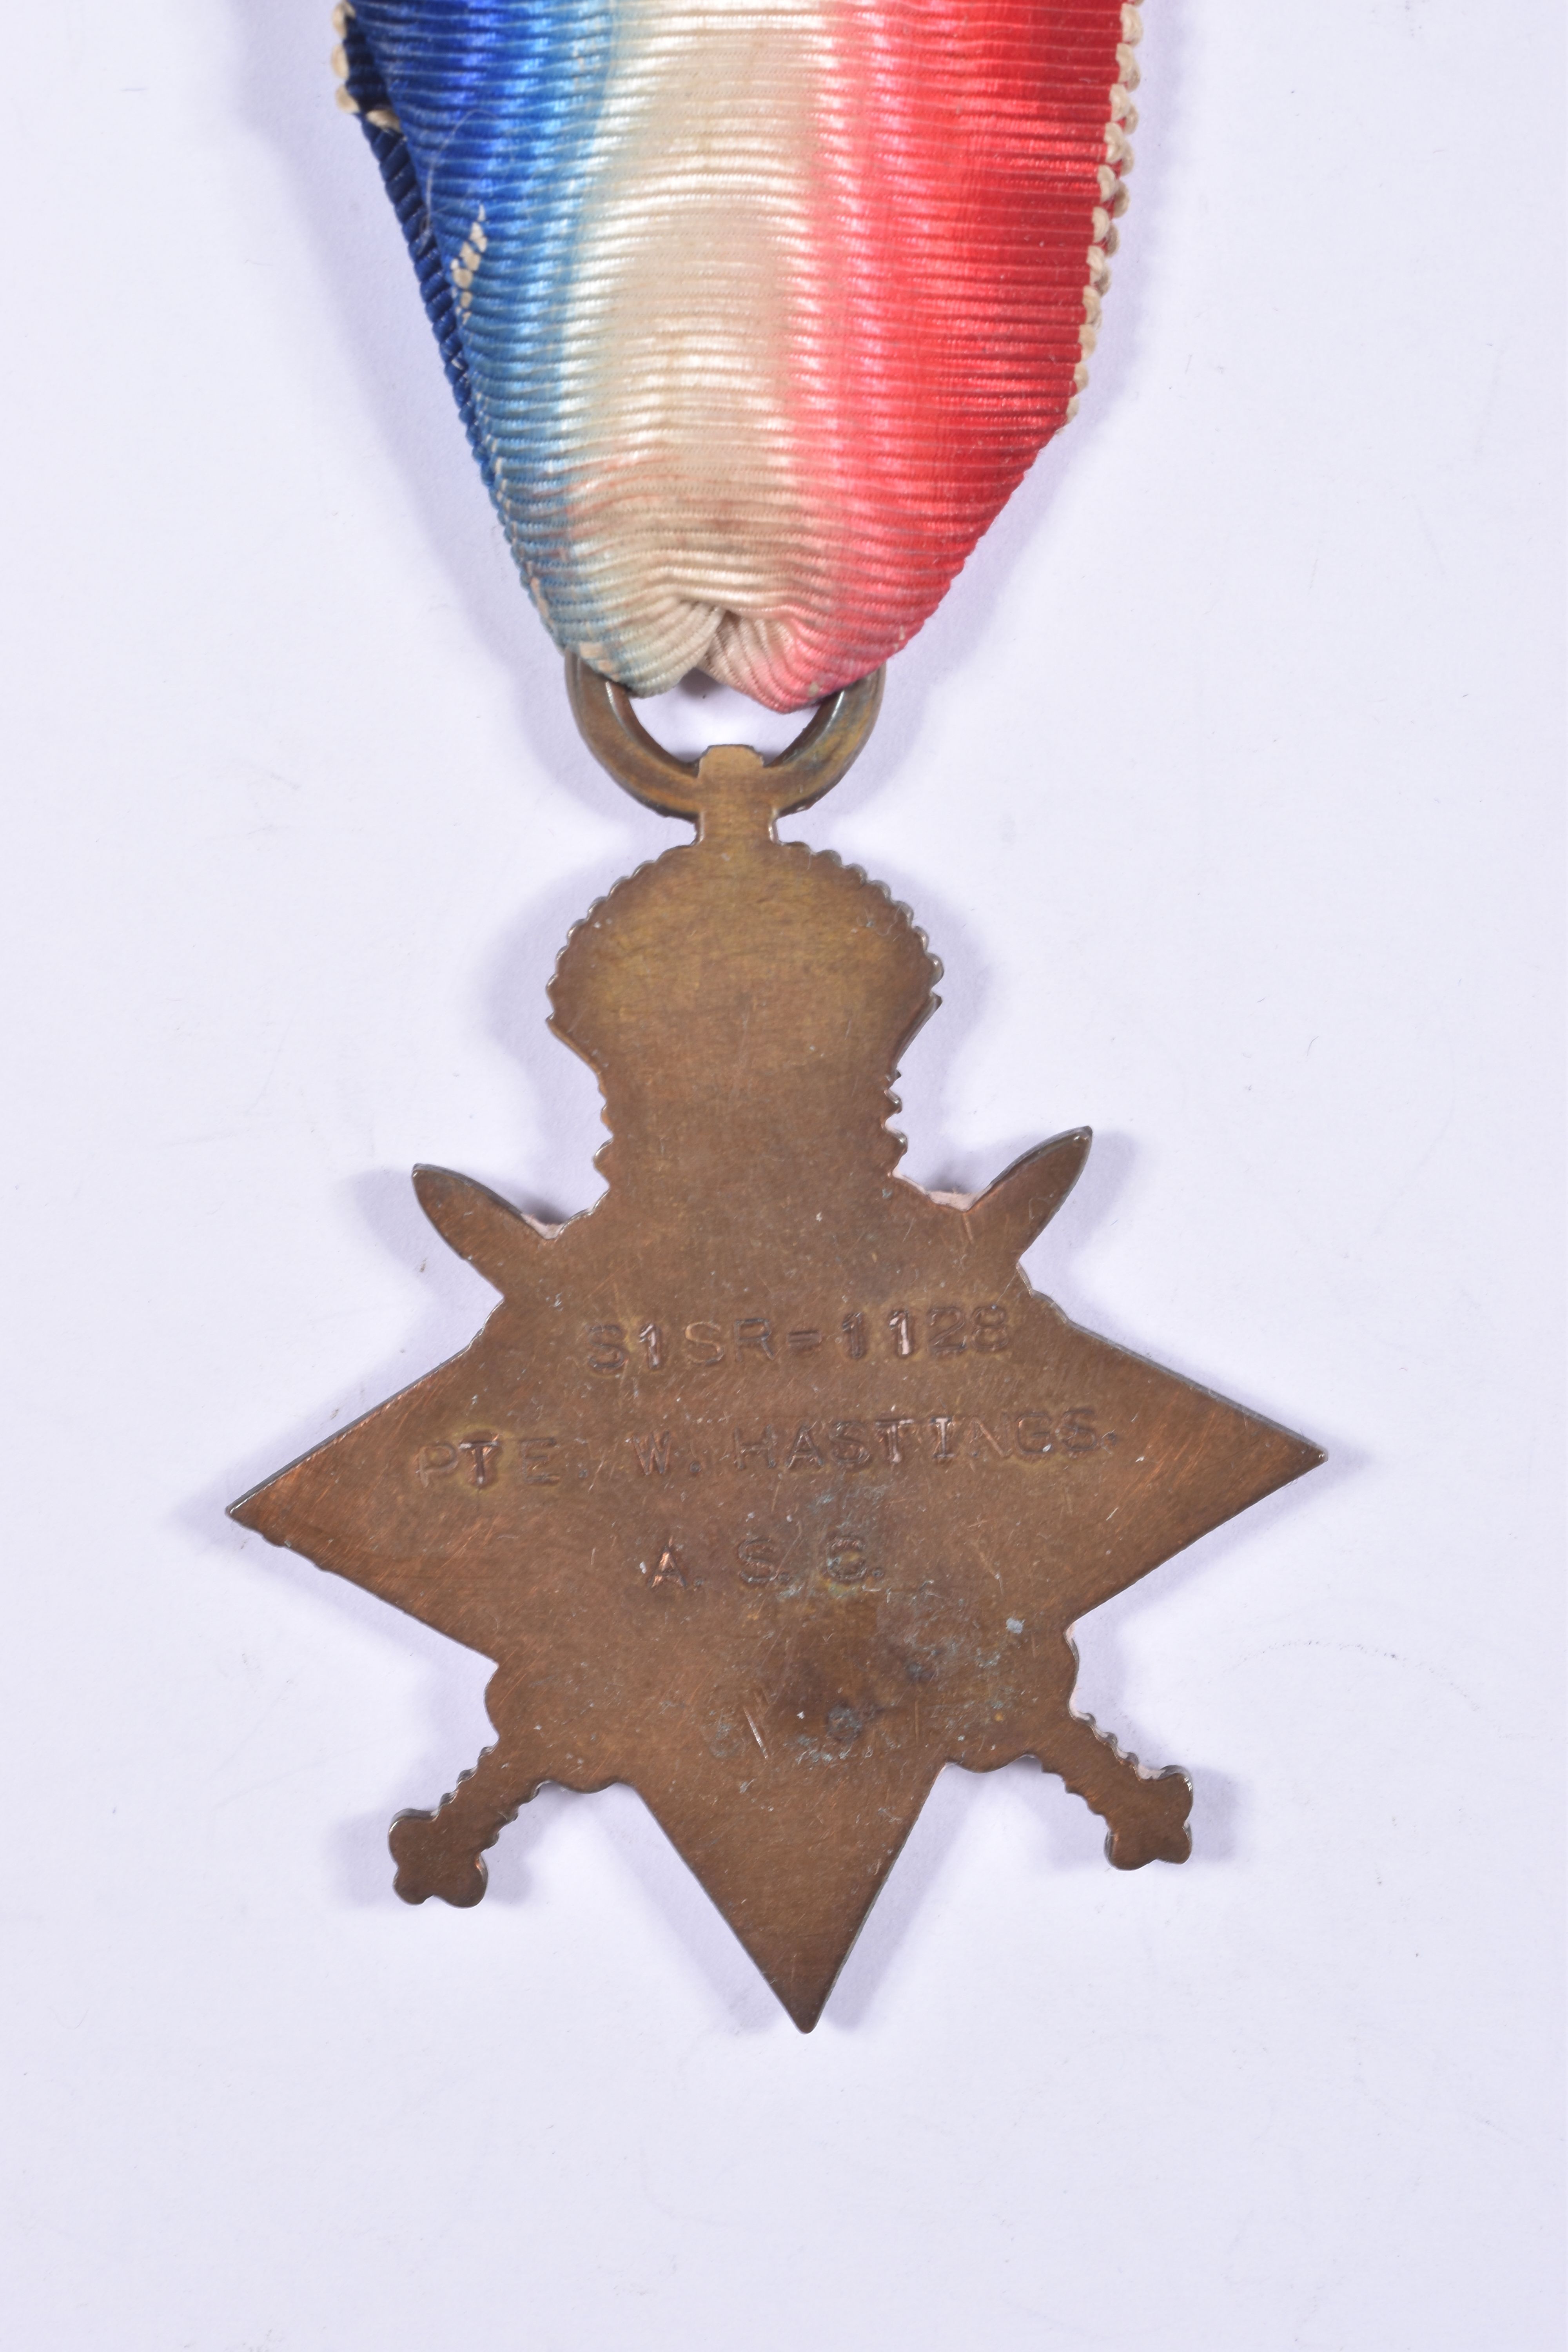 A BOERWAR AND WWI GROUP OF MEDALS, the QSA and KSA are both correctly named to 6622 PTE W HASTINGS - Image 16 of 25